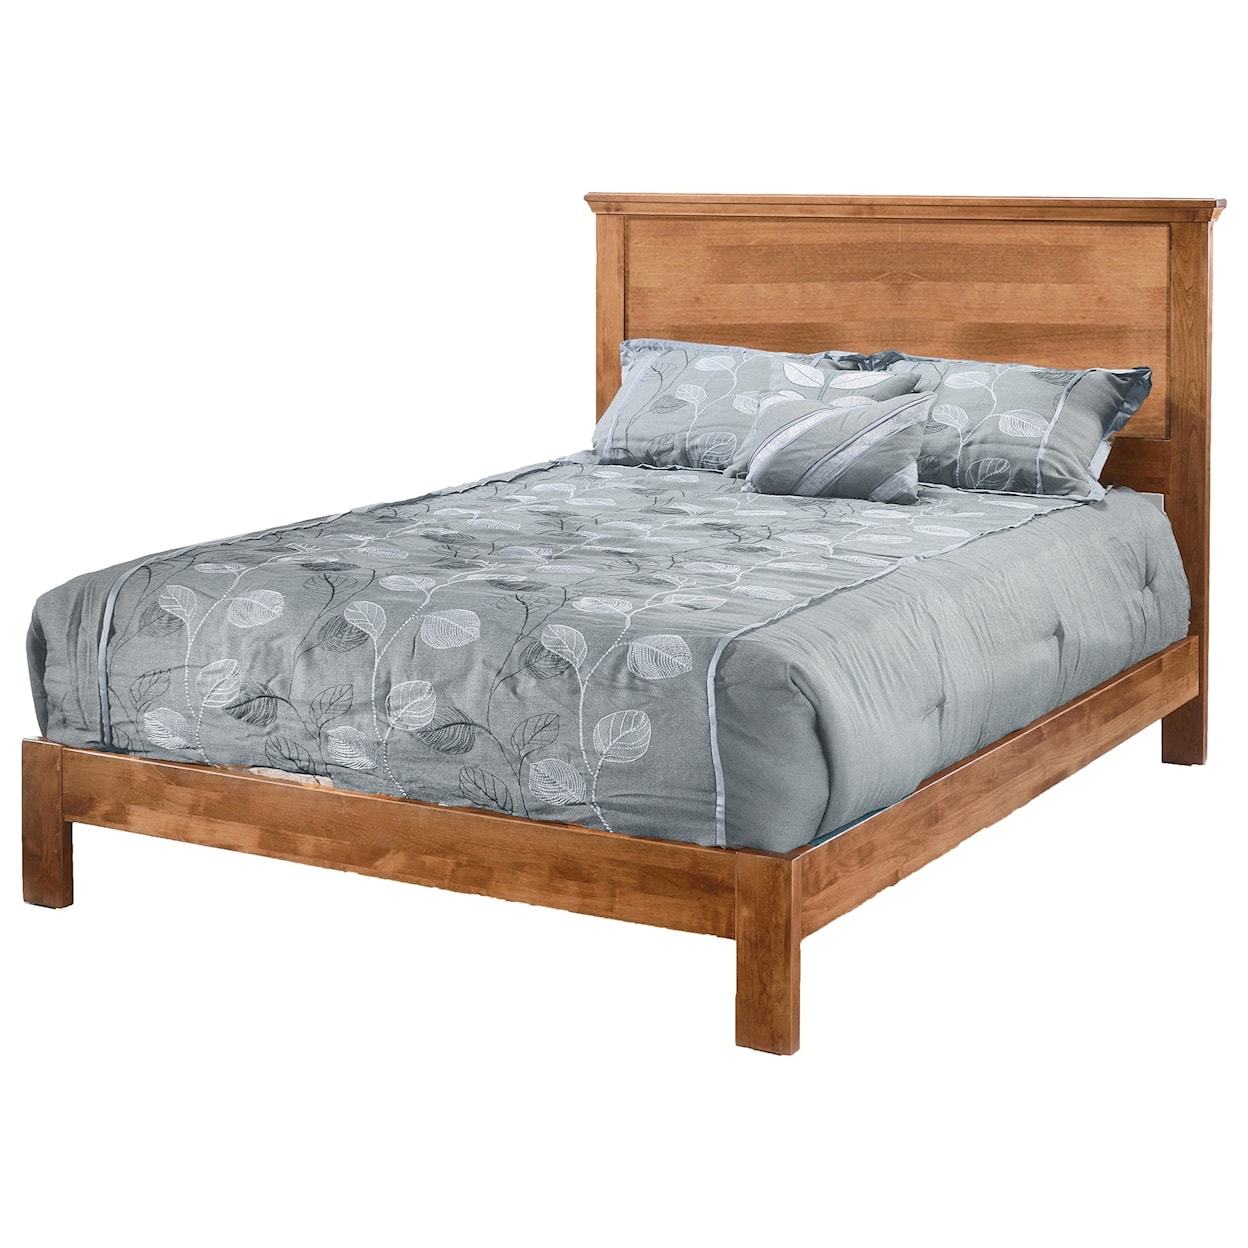 Archbold Furniture Misc. Beds Twin Plank Bed